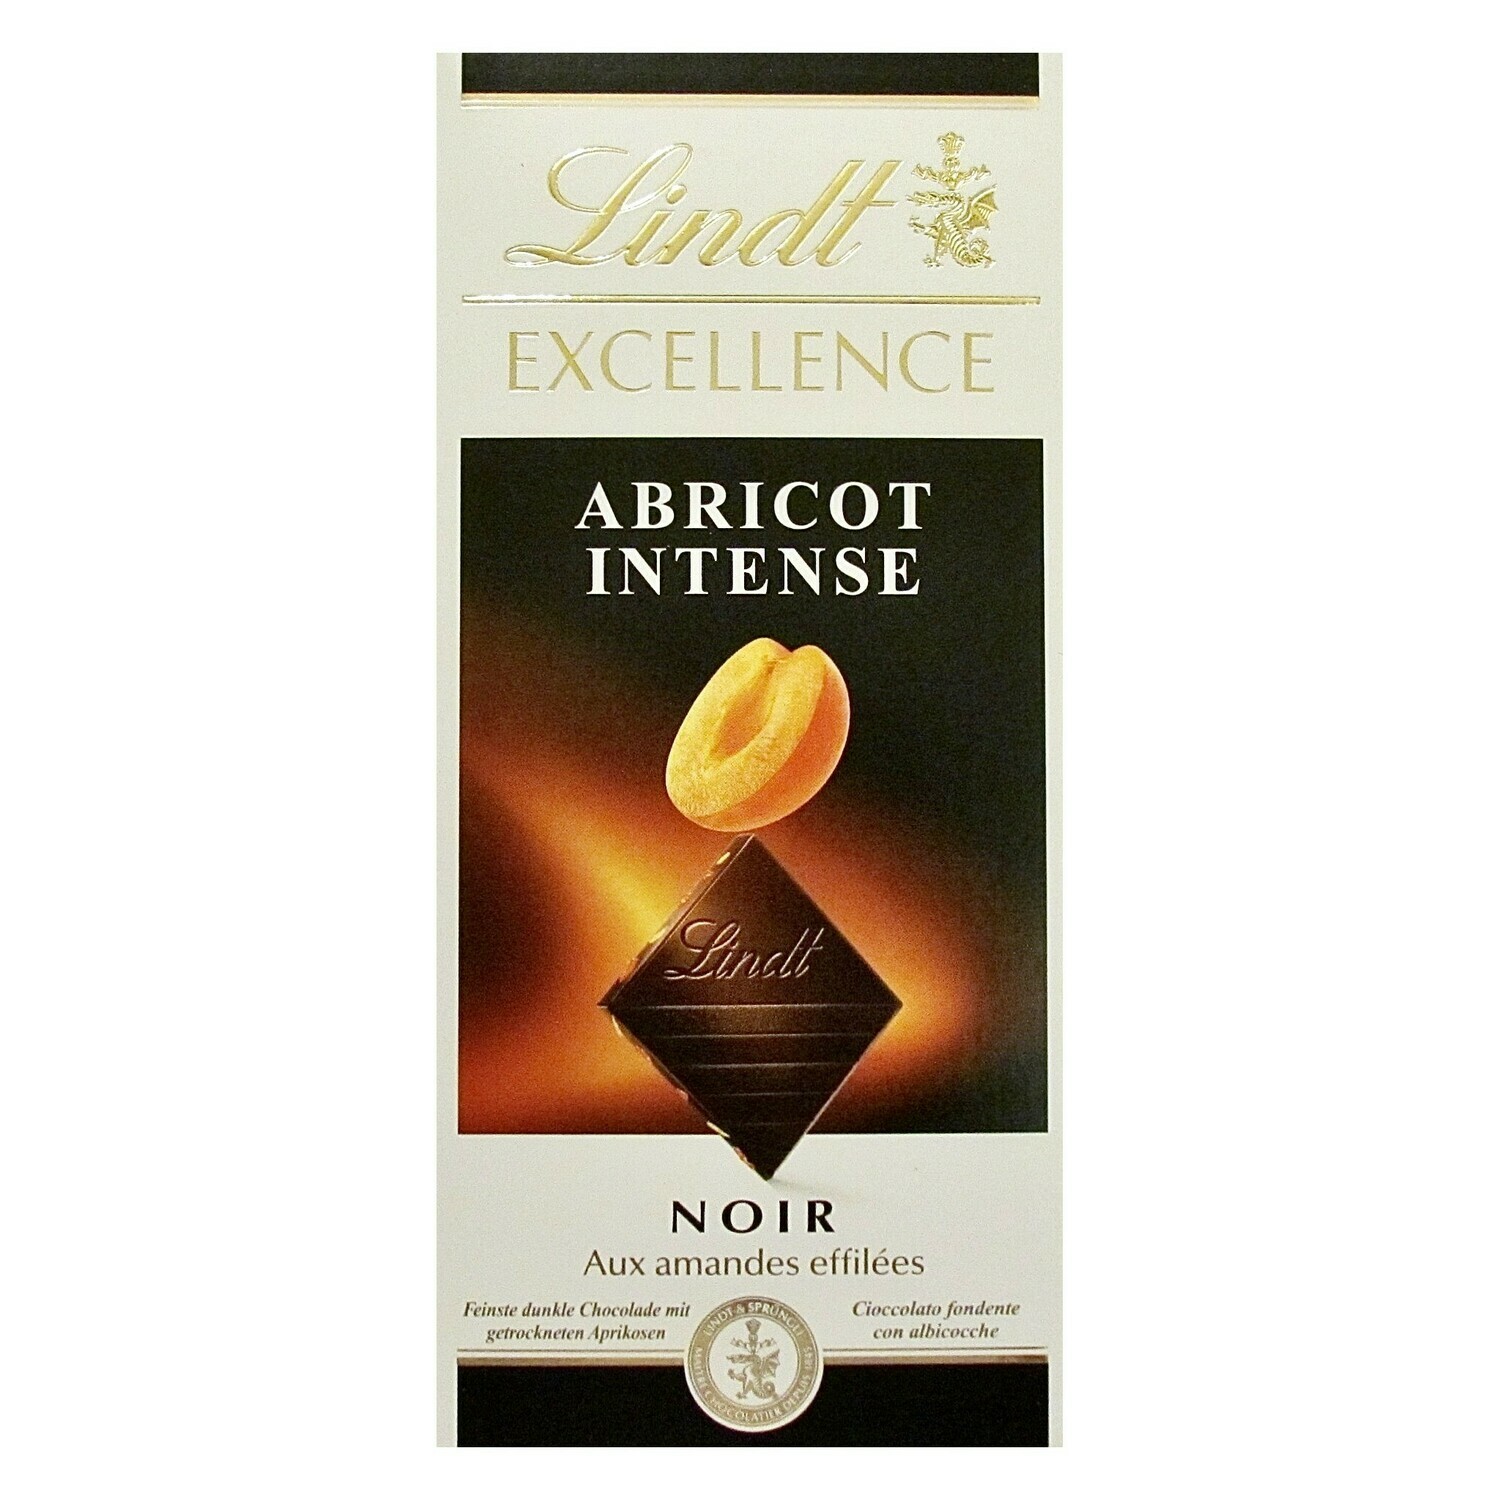 Lindt - Excellence - Abricot Intense - 100g